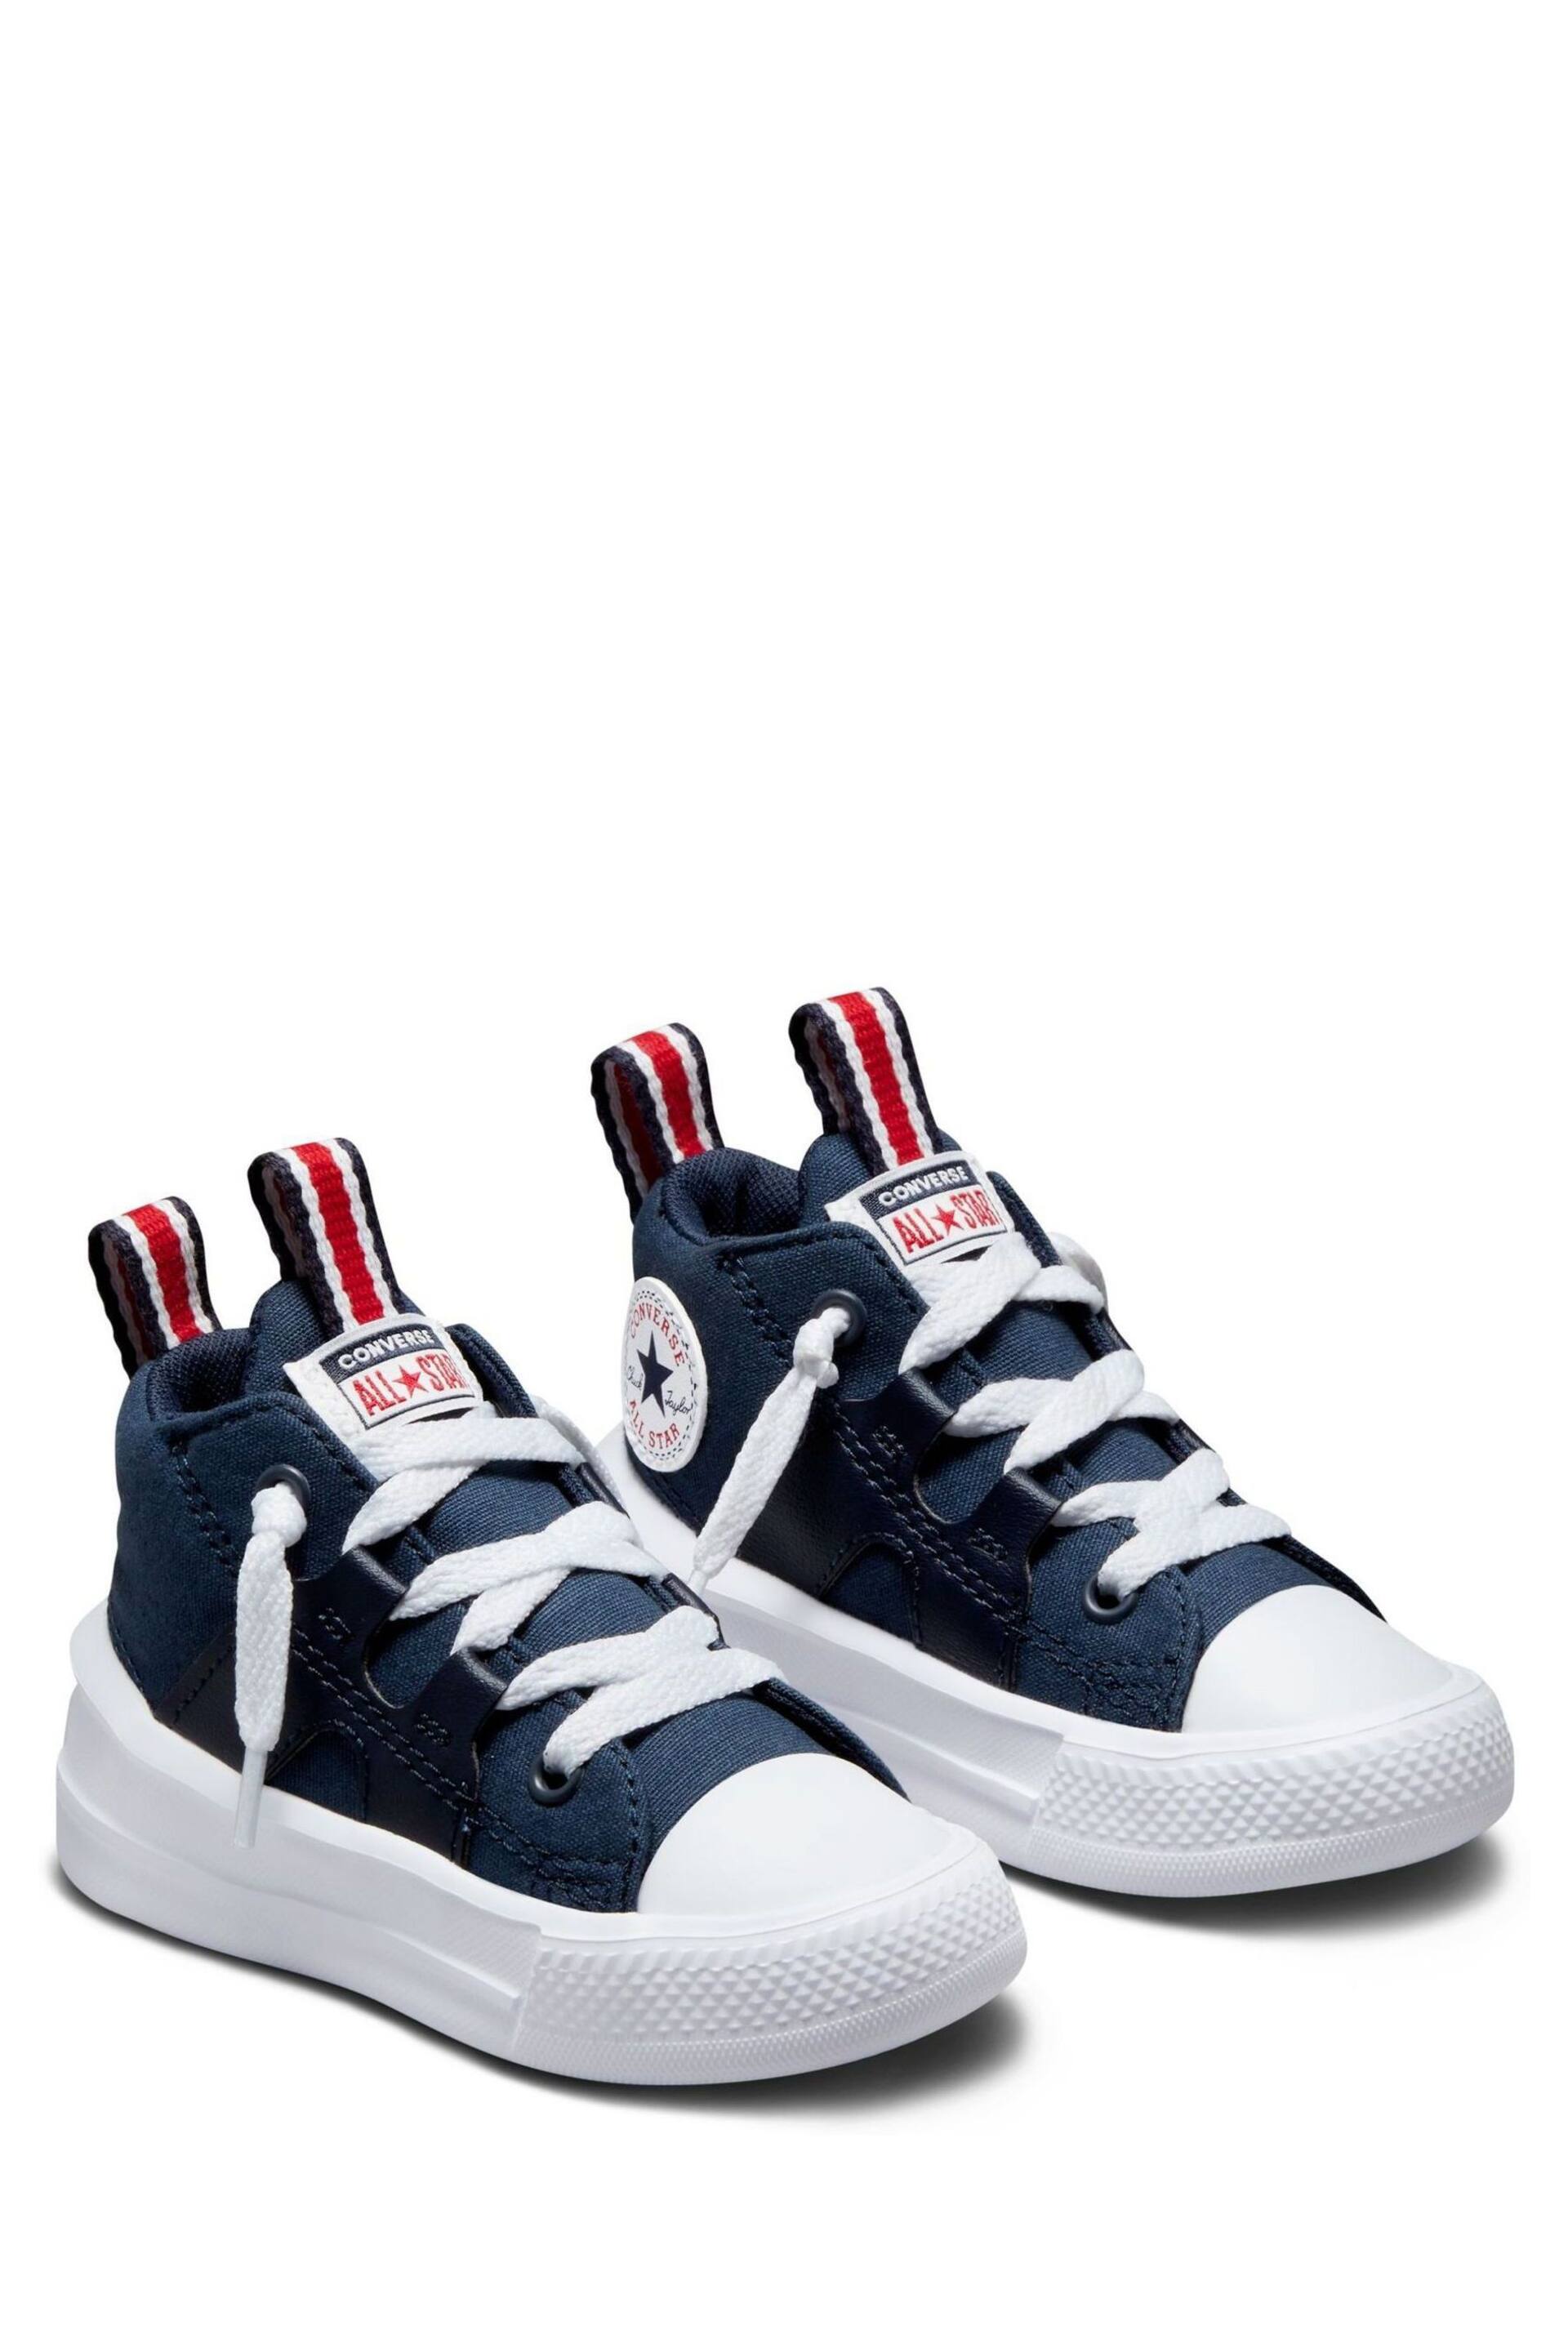 Converse Navy Ultra Infant Trainers - Image 3 of 7